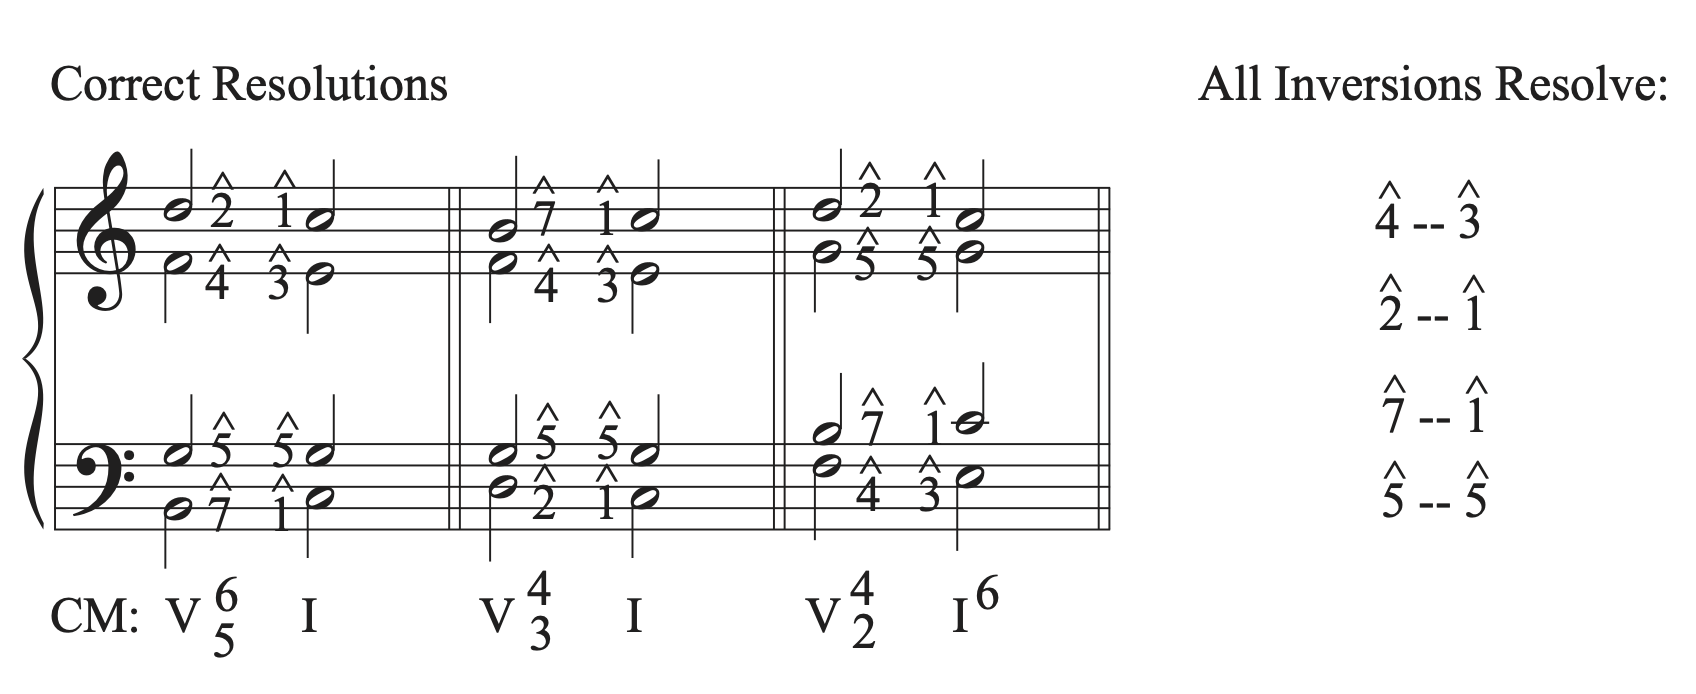 Examples of correct resolutions of V7 chords in inversions going to I chords.